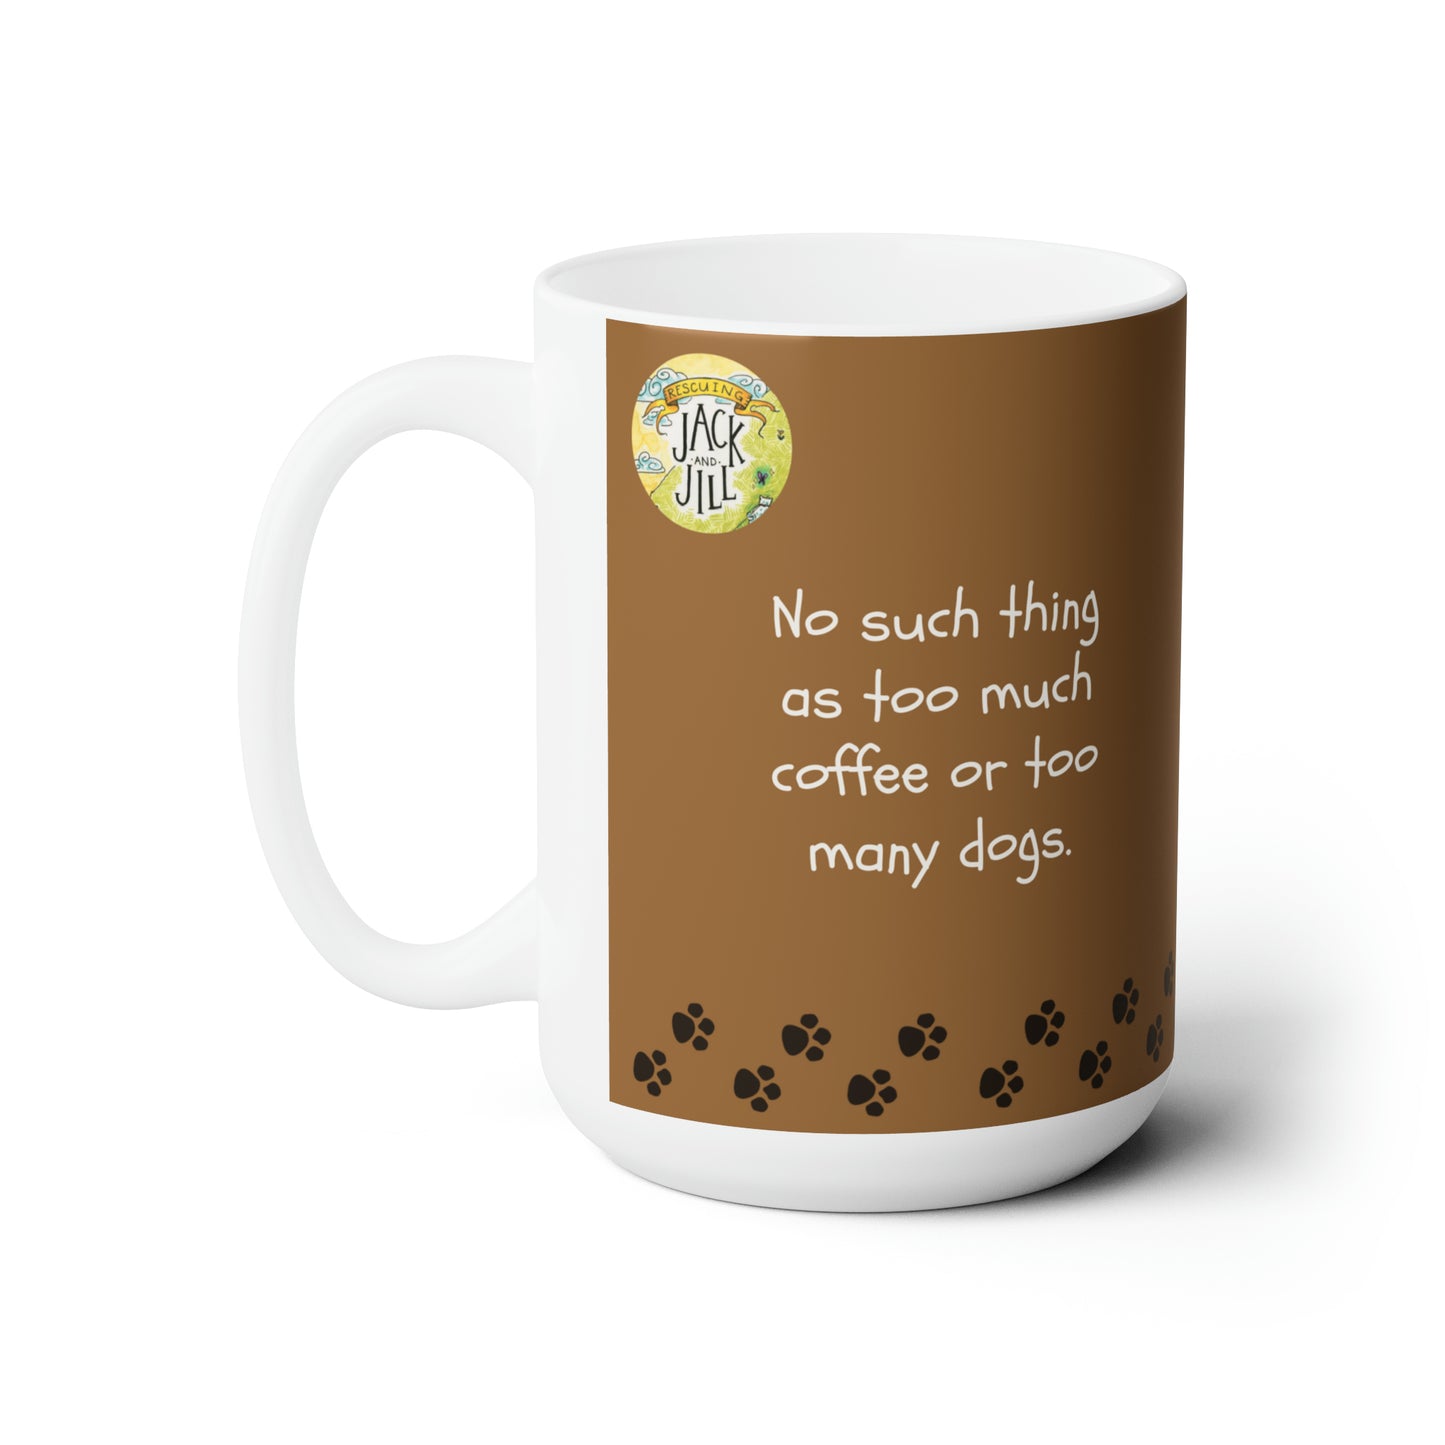 "No such thing as too much coffee or too many dogs."